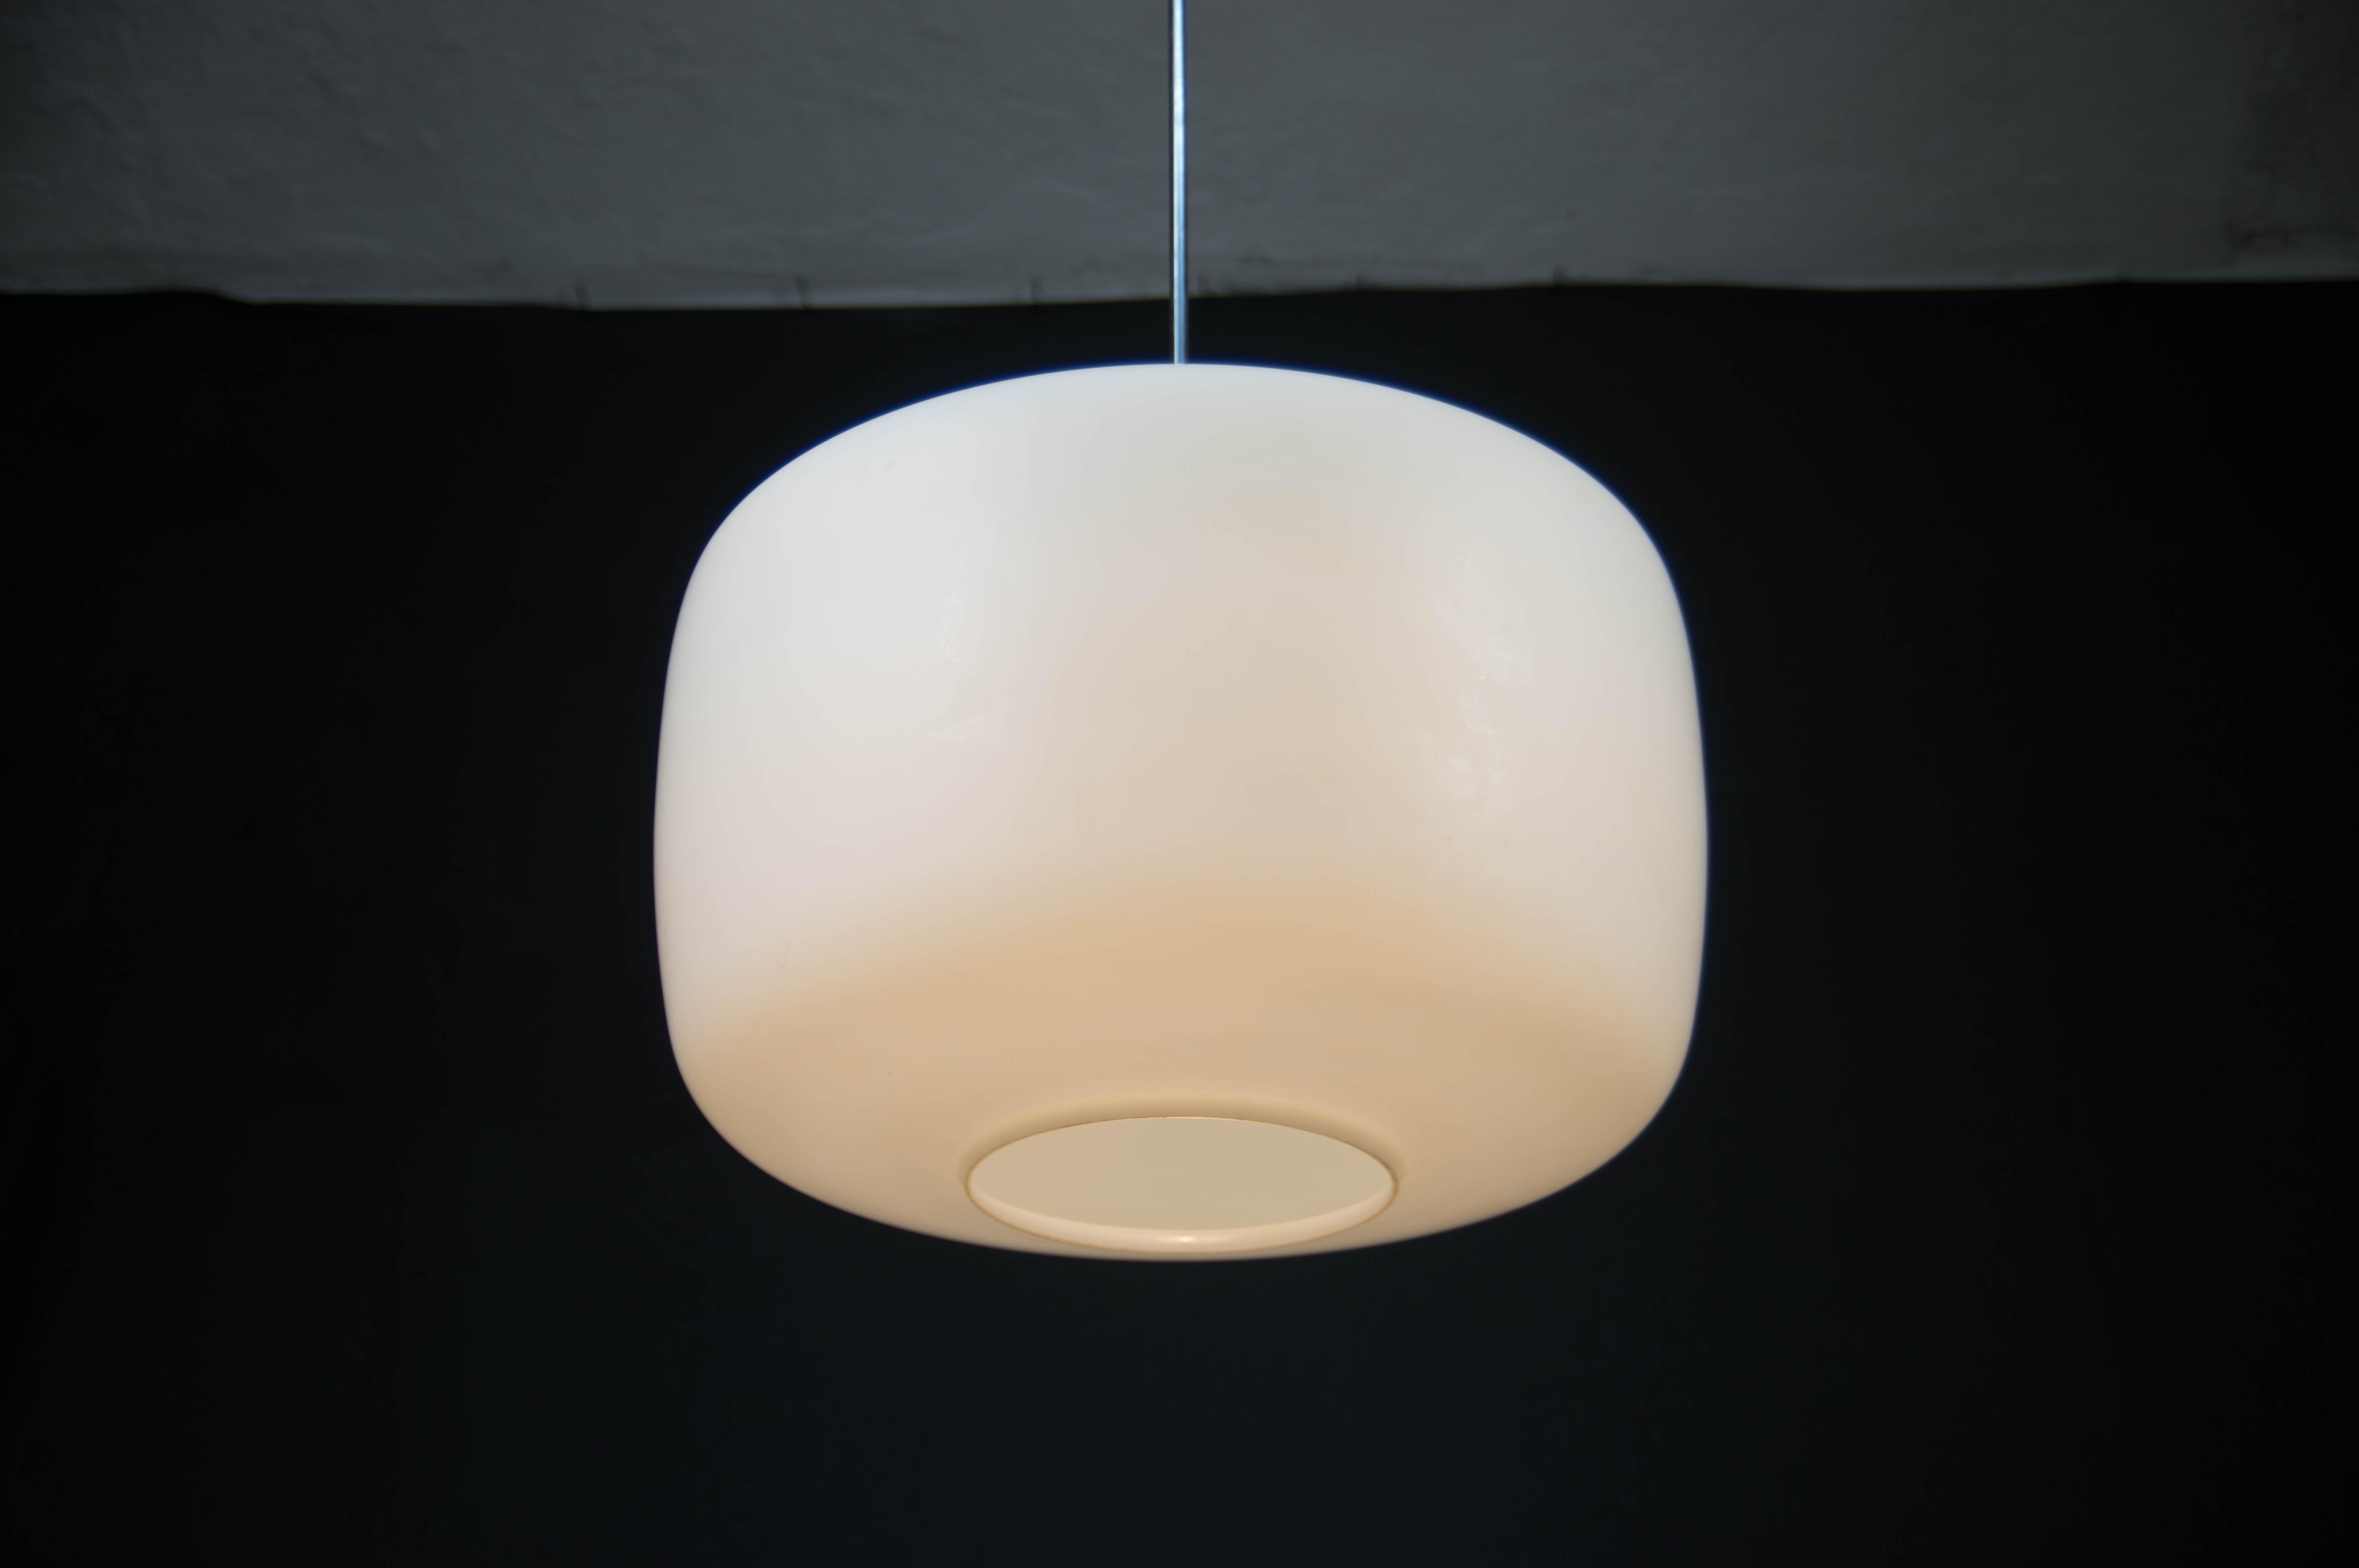 Big white opaline glass shade.
Made in Czechoslovakia in 1960s.
Eye-catching design piece.
1x100W, E25-E27 bulb
US wiring compatible
The length of the central rod on demand.